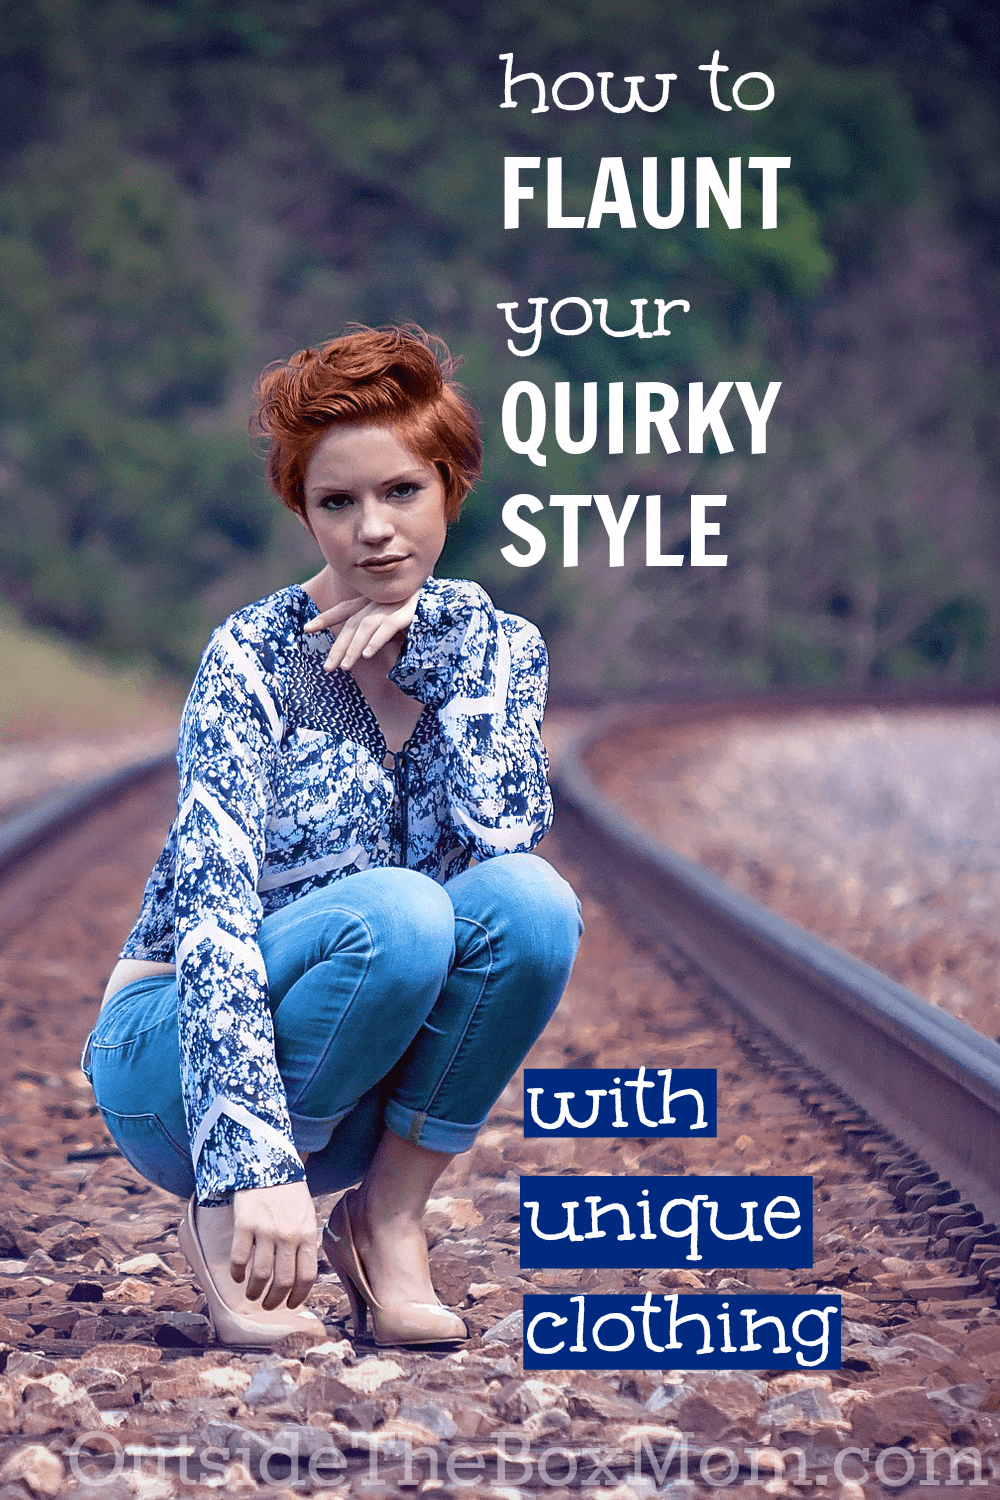 Do you want to be one of those women who is a design trendsetter with a unique style, instead of being a fashionable follower? Here are 8 quick and easy ways to dress with unique clothing and show off your quirky style. | OutsideTheBoxMom.com